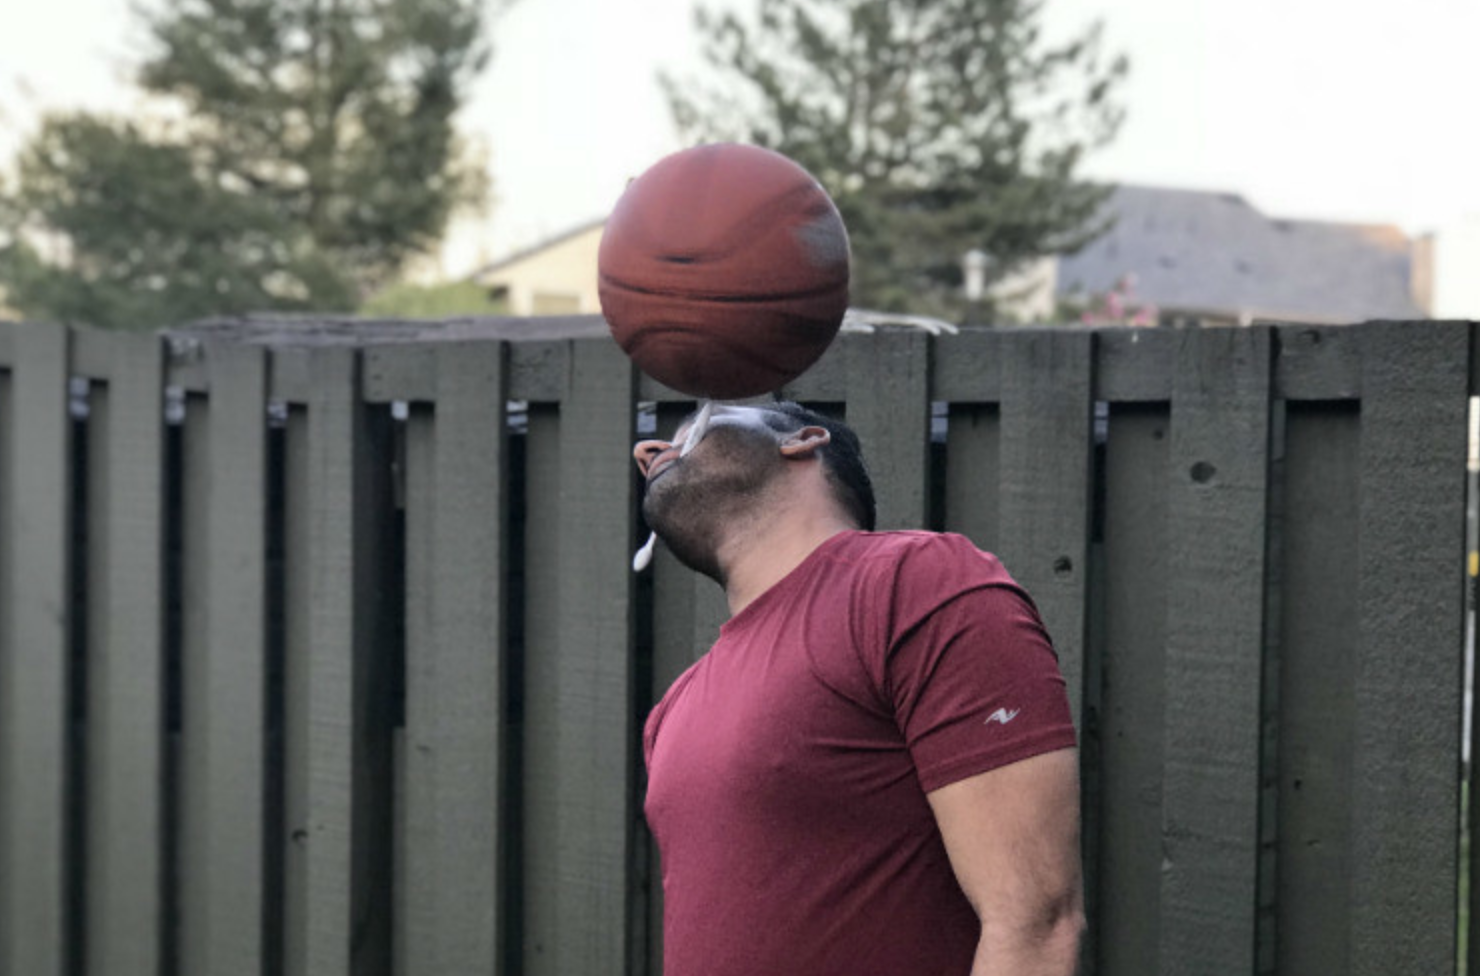 Basketball spinning on a toothbrish